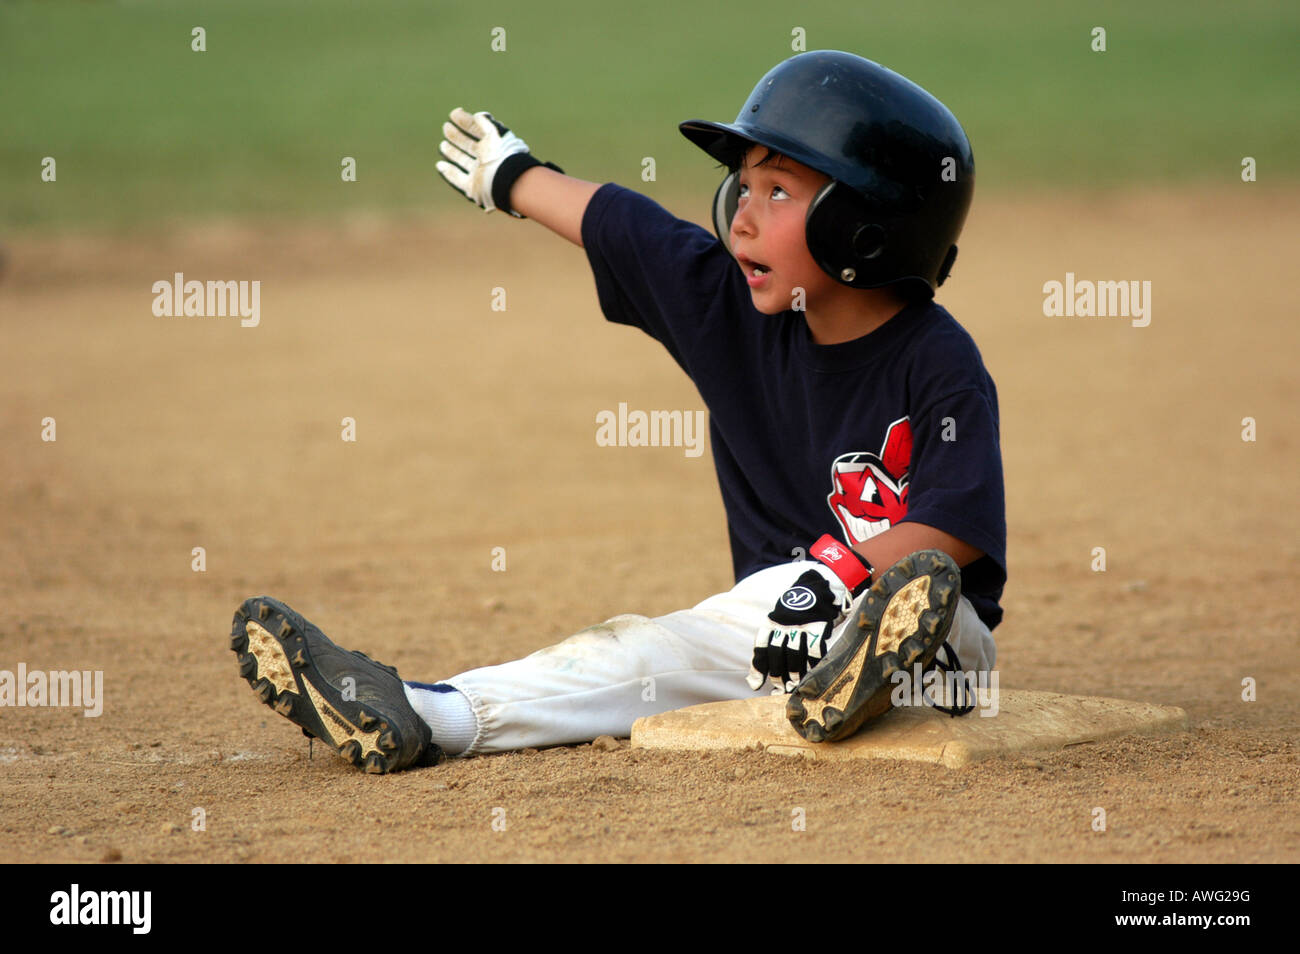 Five year argues with umpire while sitting on third base after called out baseball Ohio USA Stock Photo